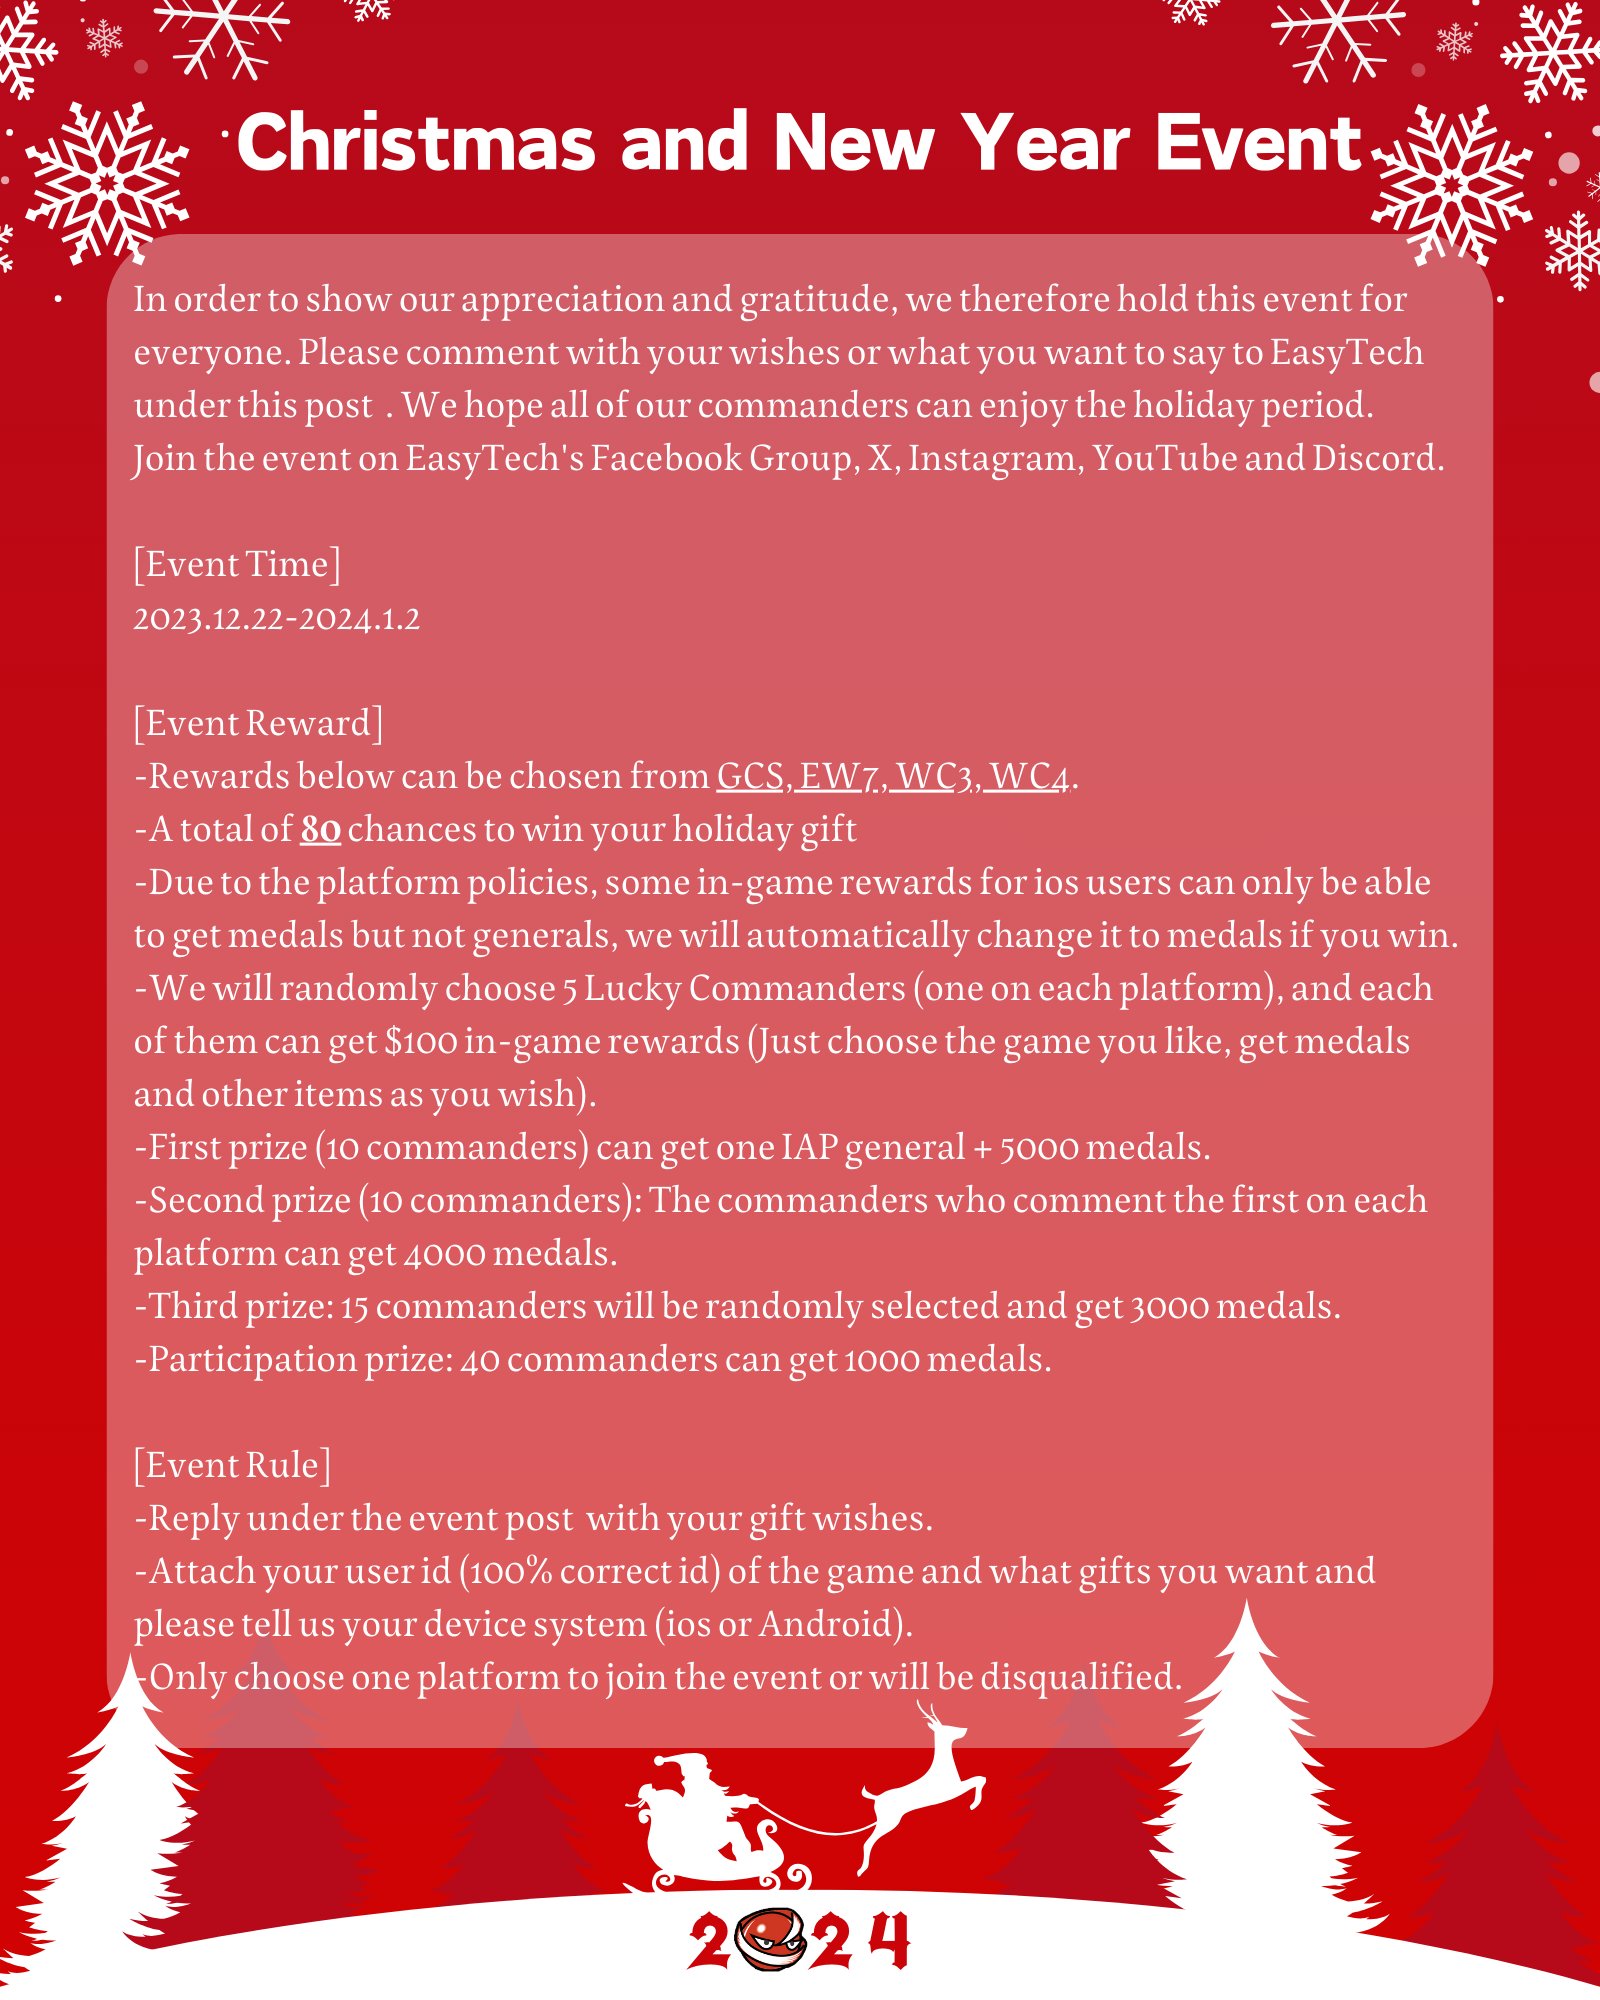 White Elephant Gift Exchange Rules (How To Play + PDF)